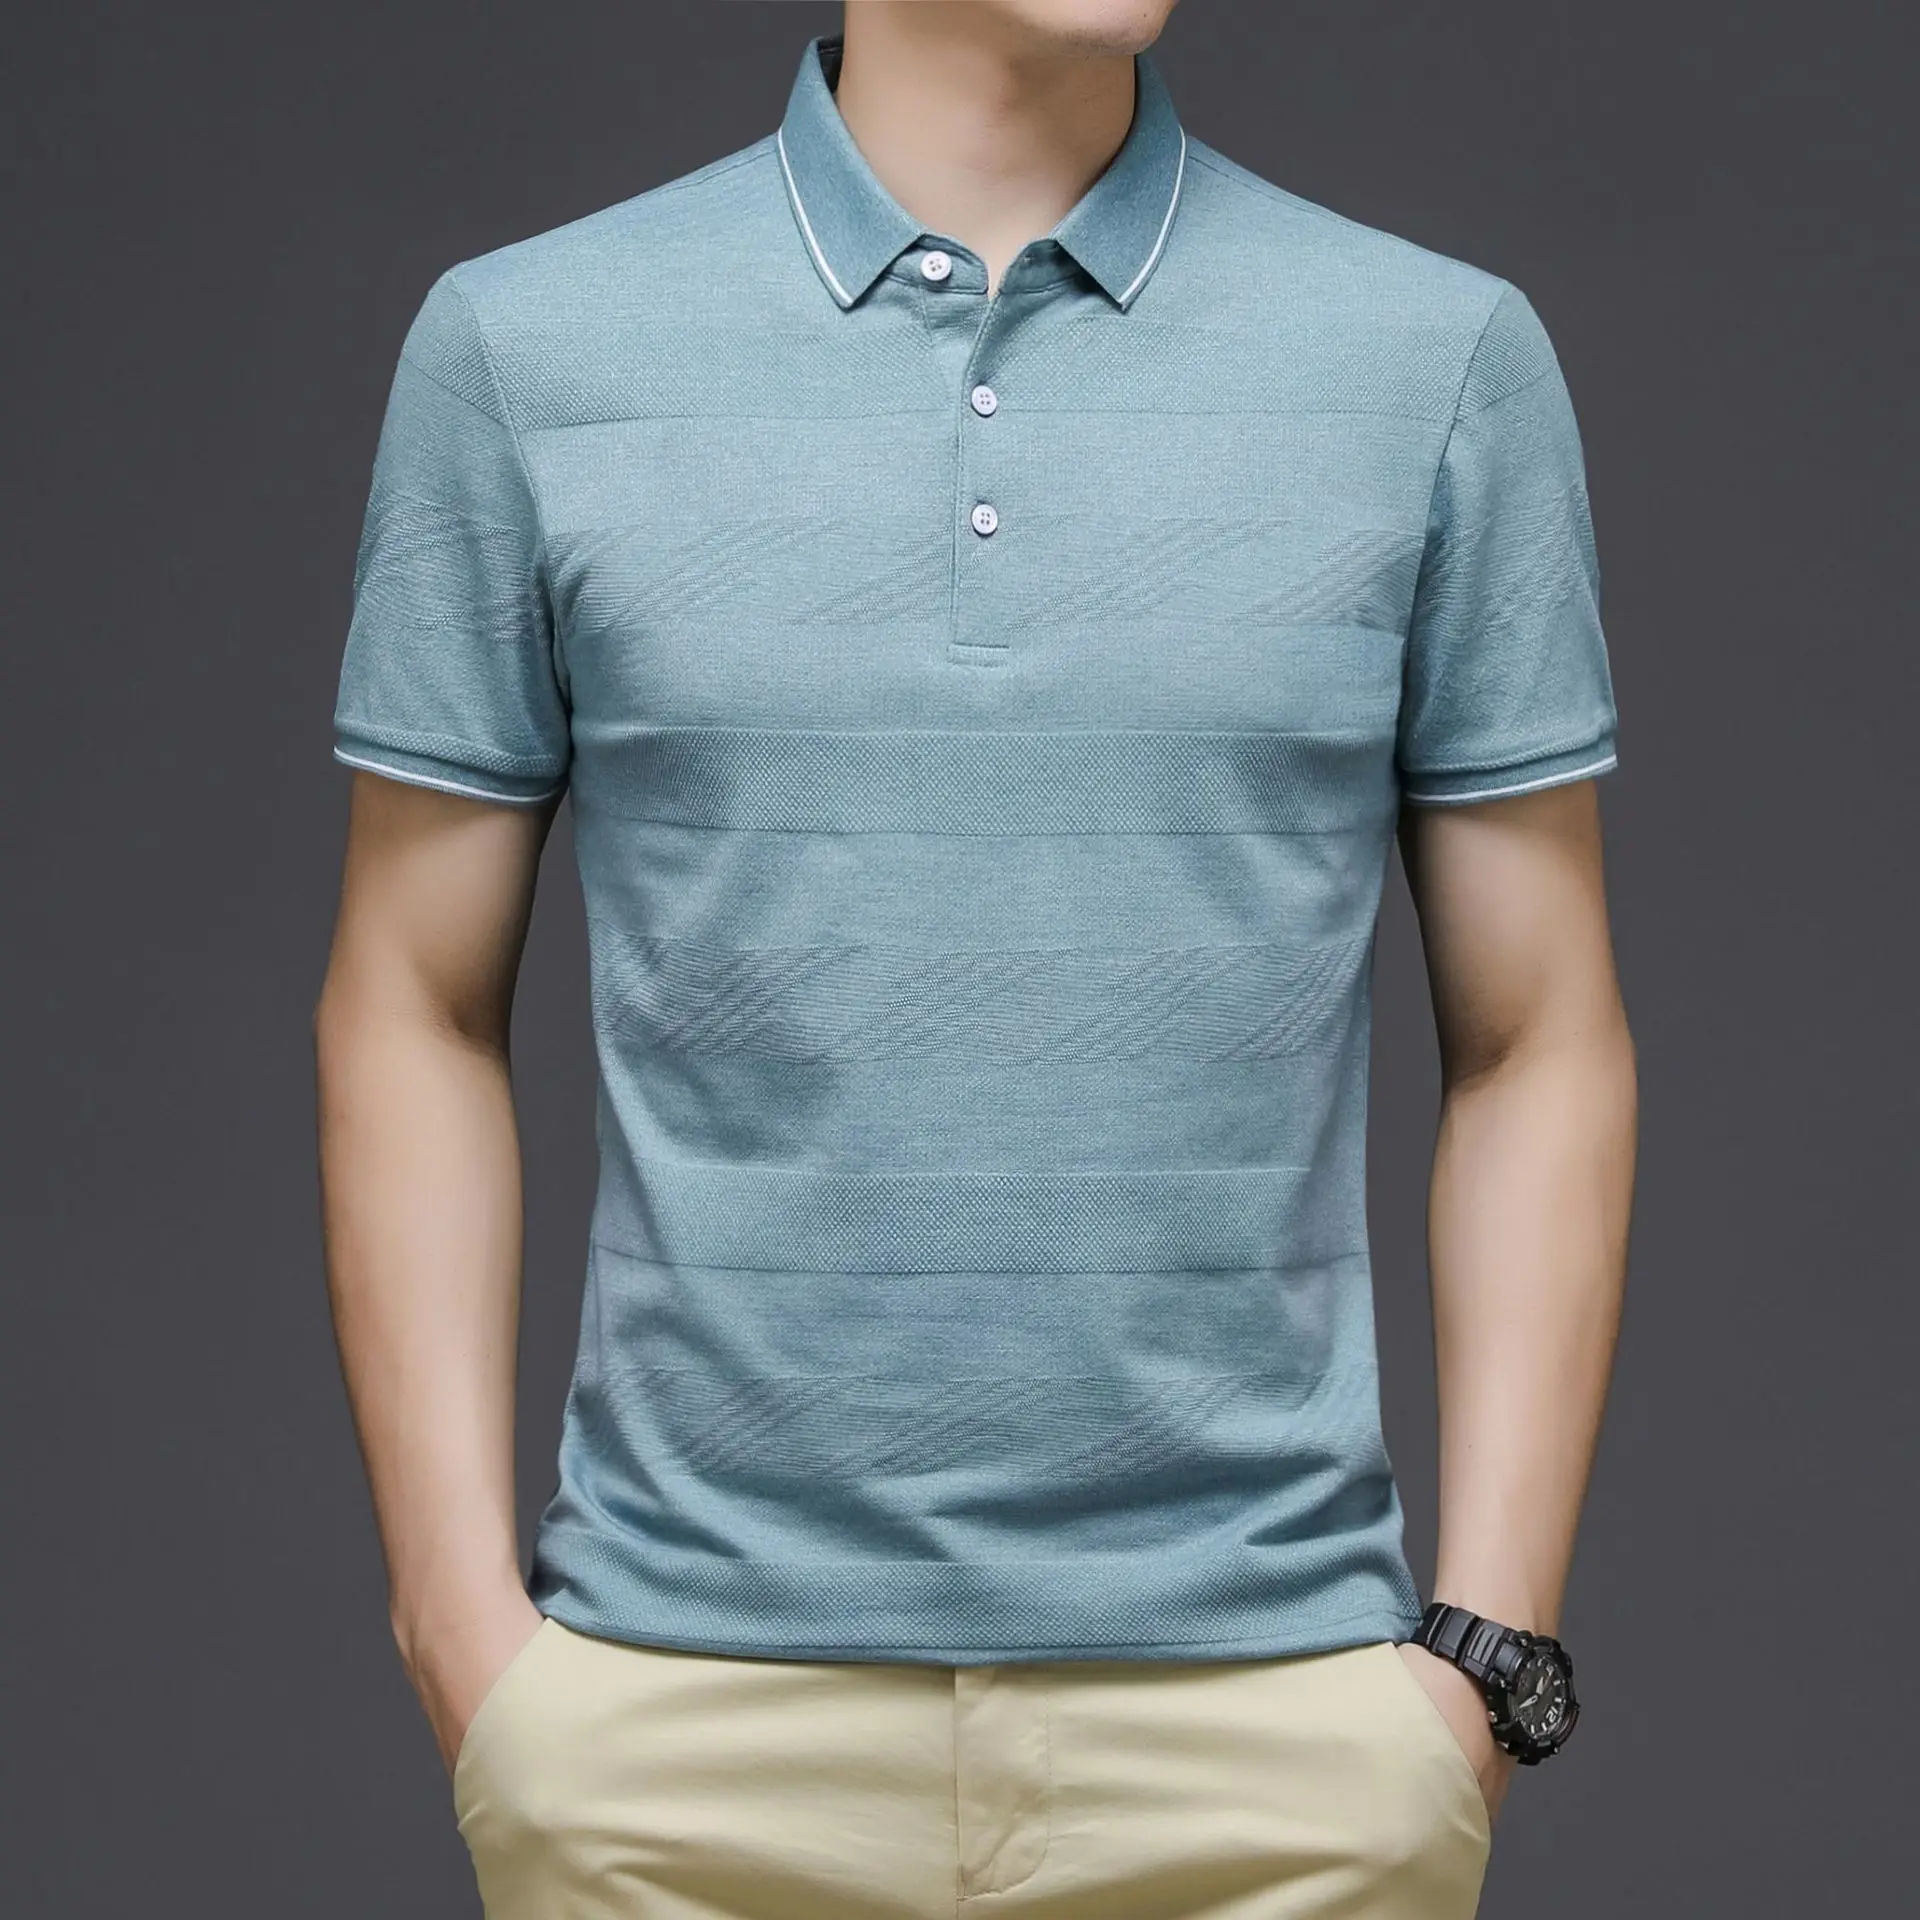 

Breathable Cotton Short Sleeve Polo Shirt Men Solid Blue Fashion Brand Ice Silk Polos Mens Summer T Shirts For Golf Slim Fit New